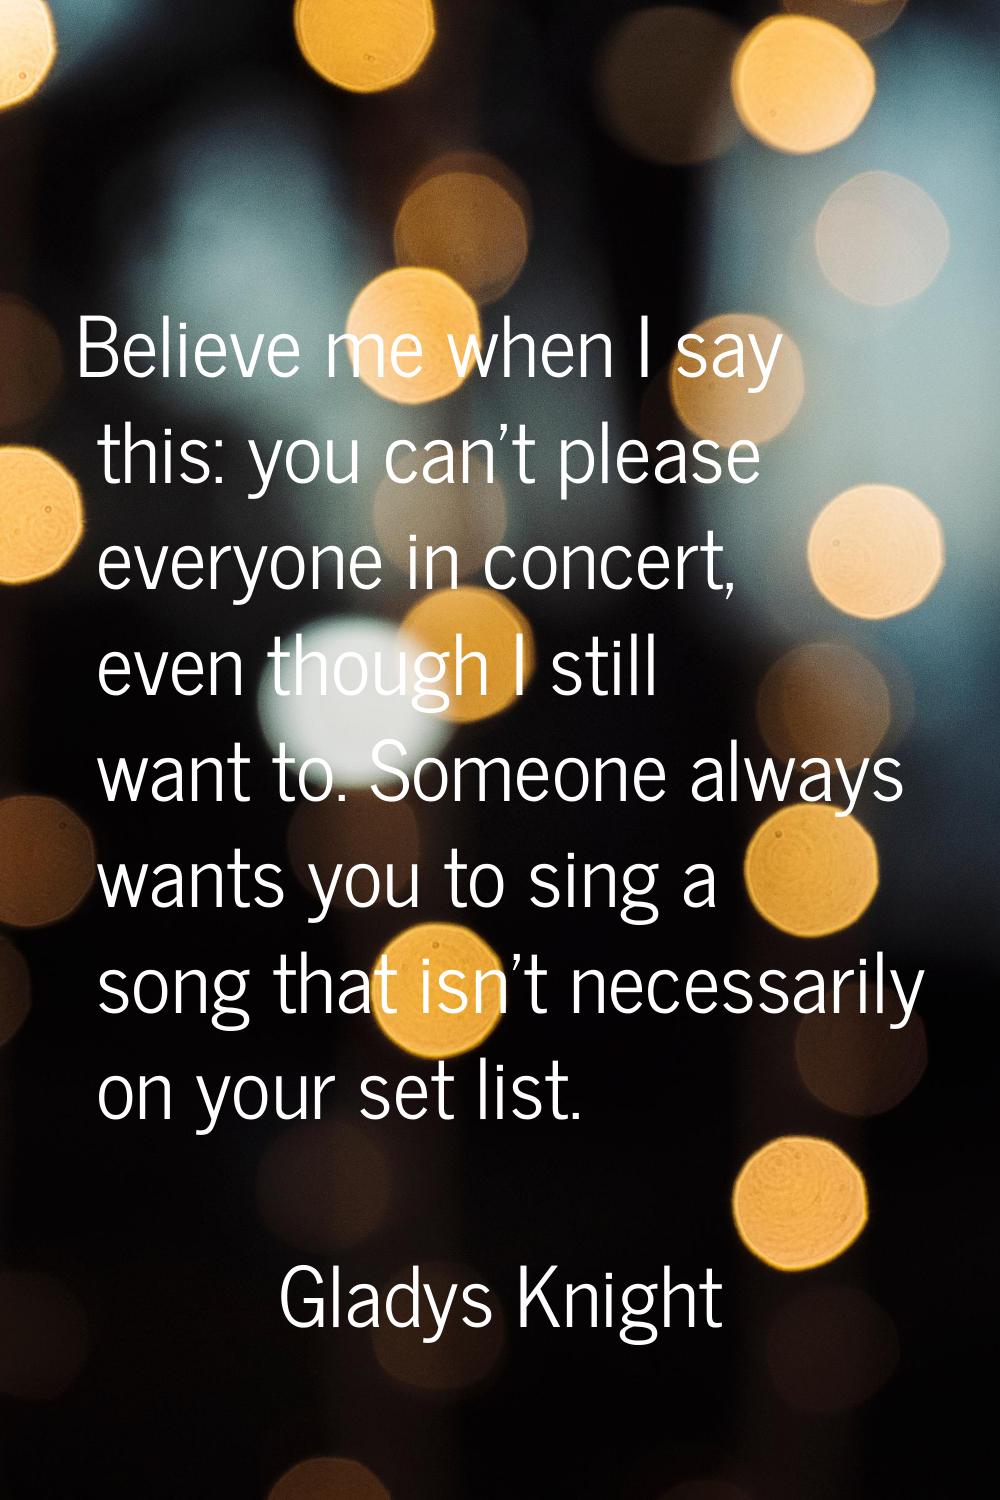 Believe me when I say this: you can't please everyone in concert, even though I still want to. Some